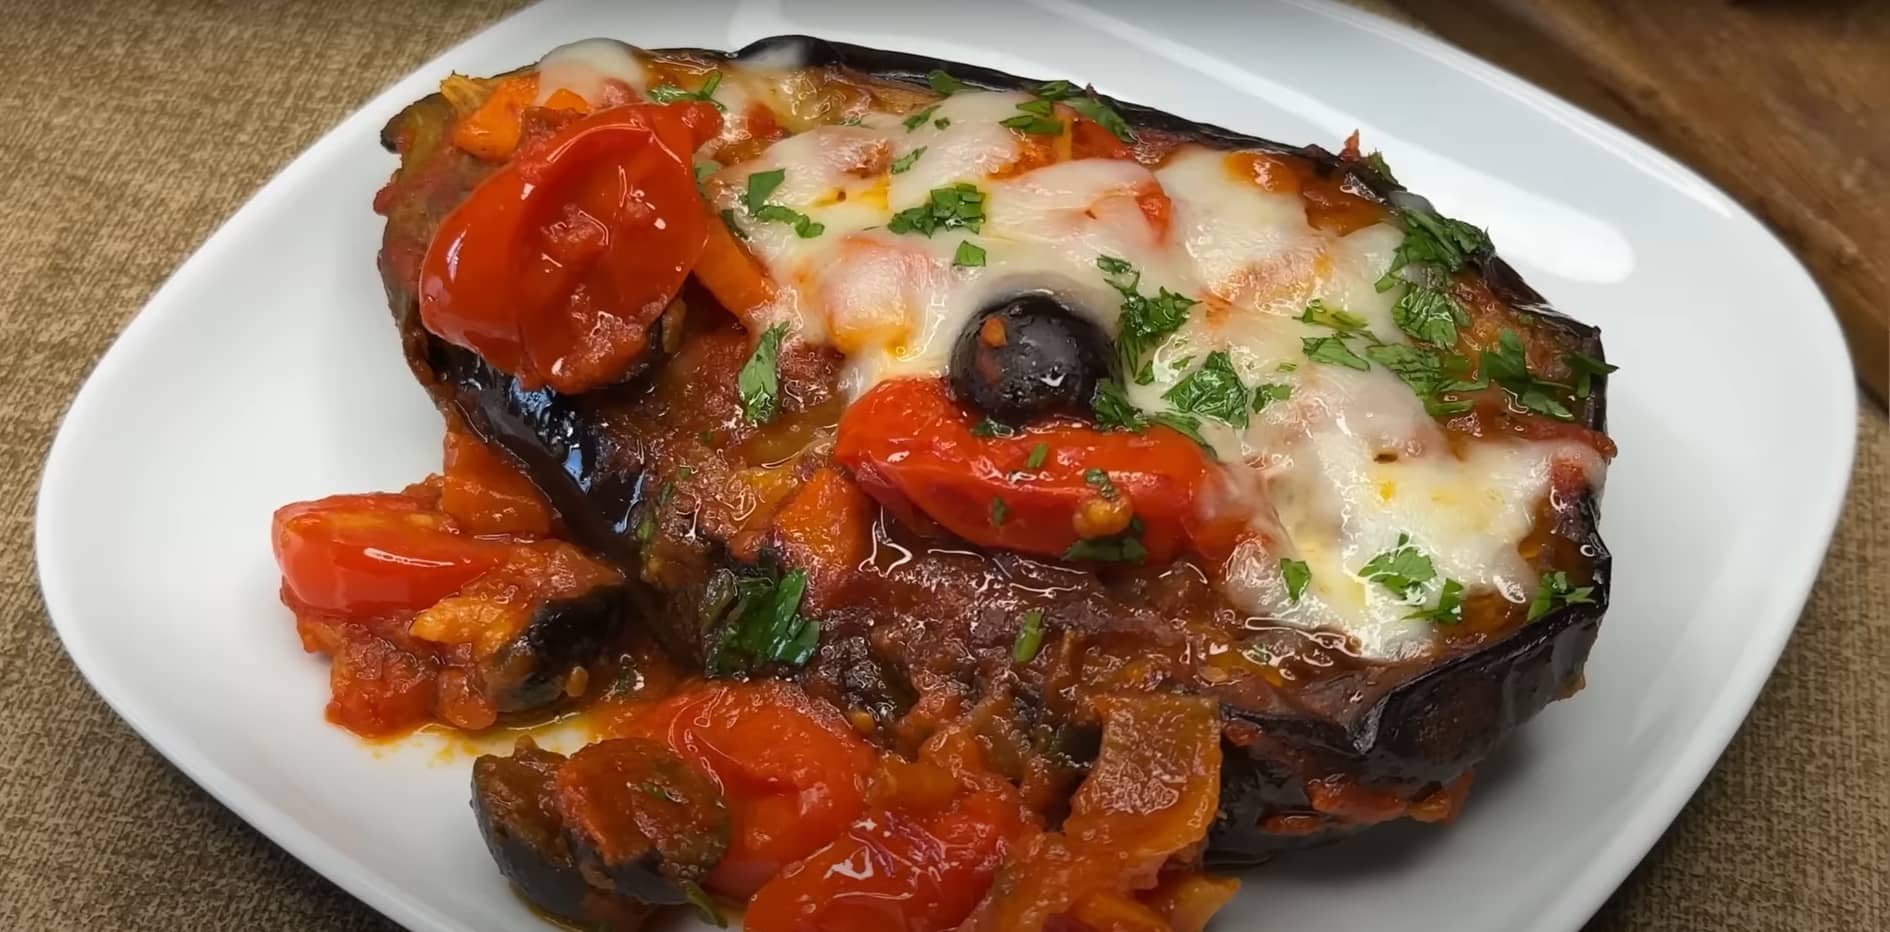 Pan-fried Eggplant With Tomato Sauce Recipe